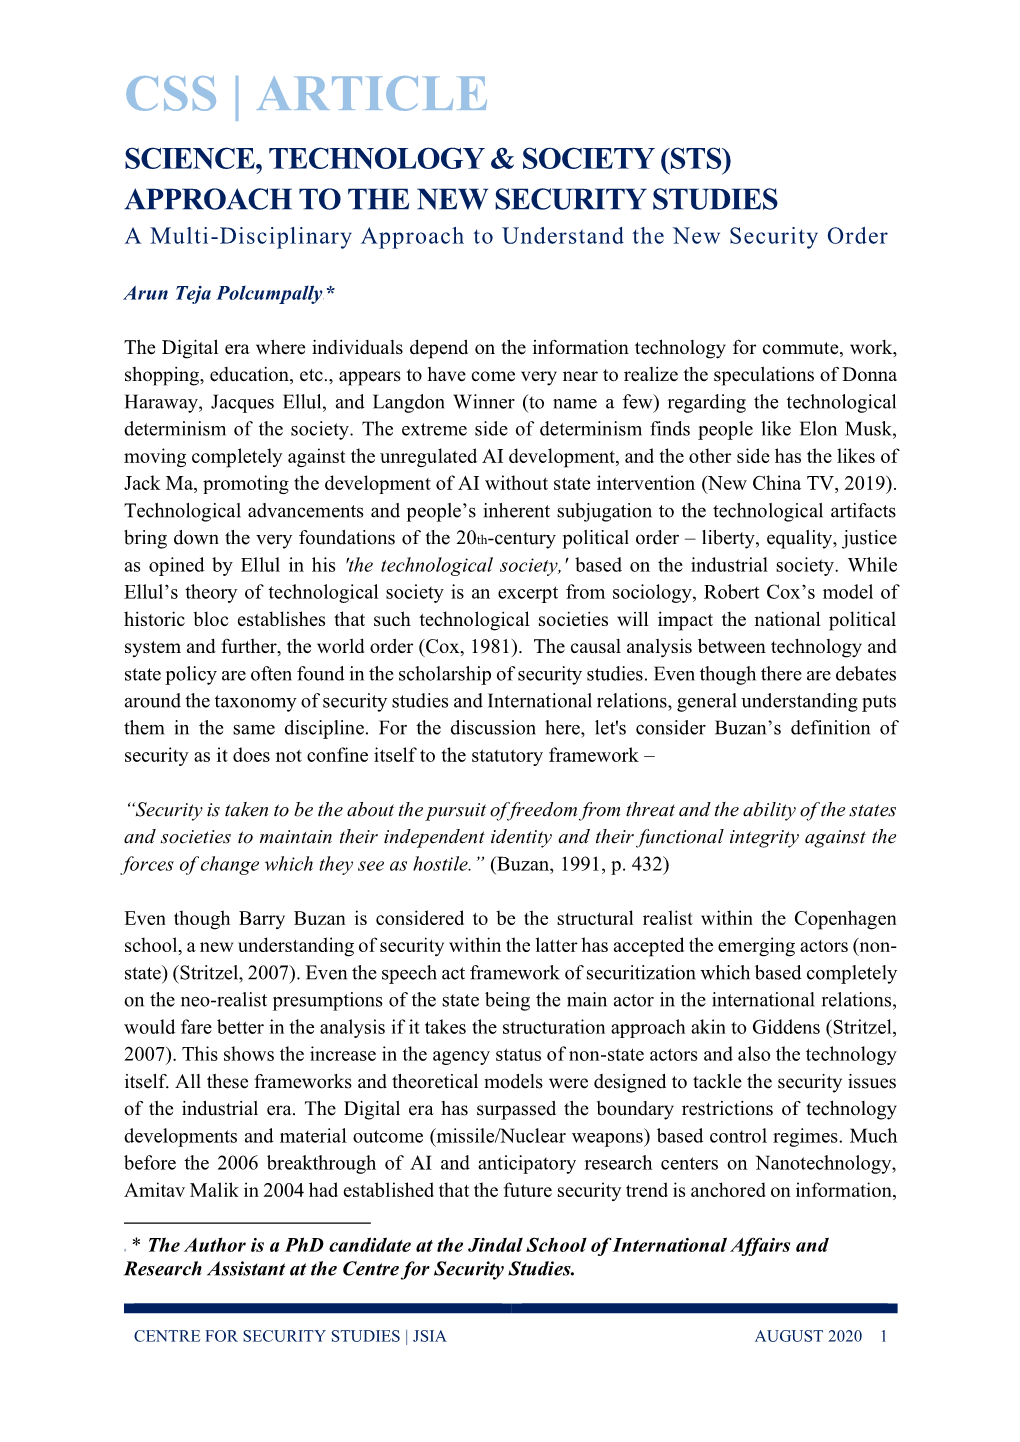 (STS) APPROACH to the NEW SECURITY STUDIES a Multi-Disciplinary Approach to Understand the New Security Order